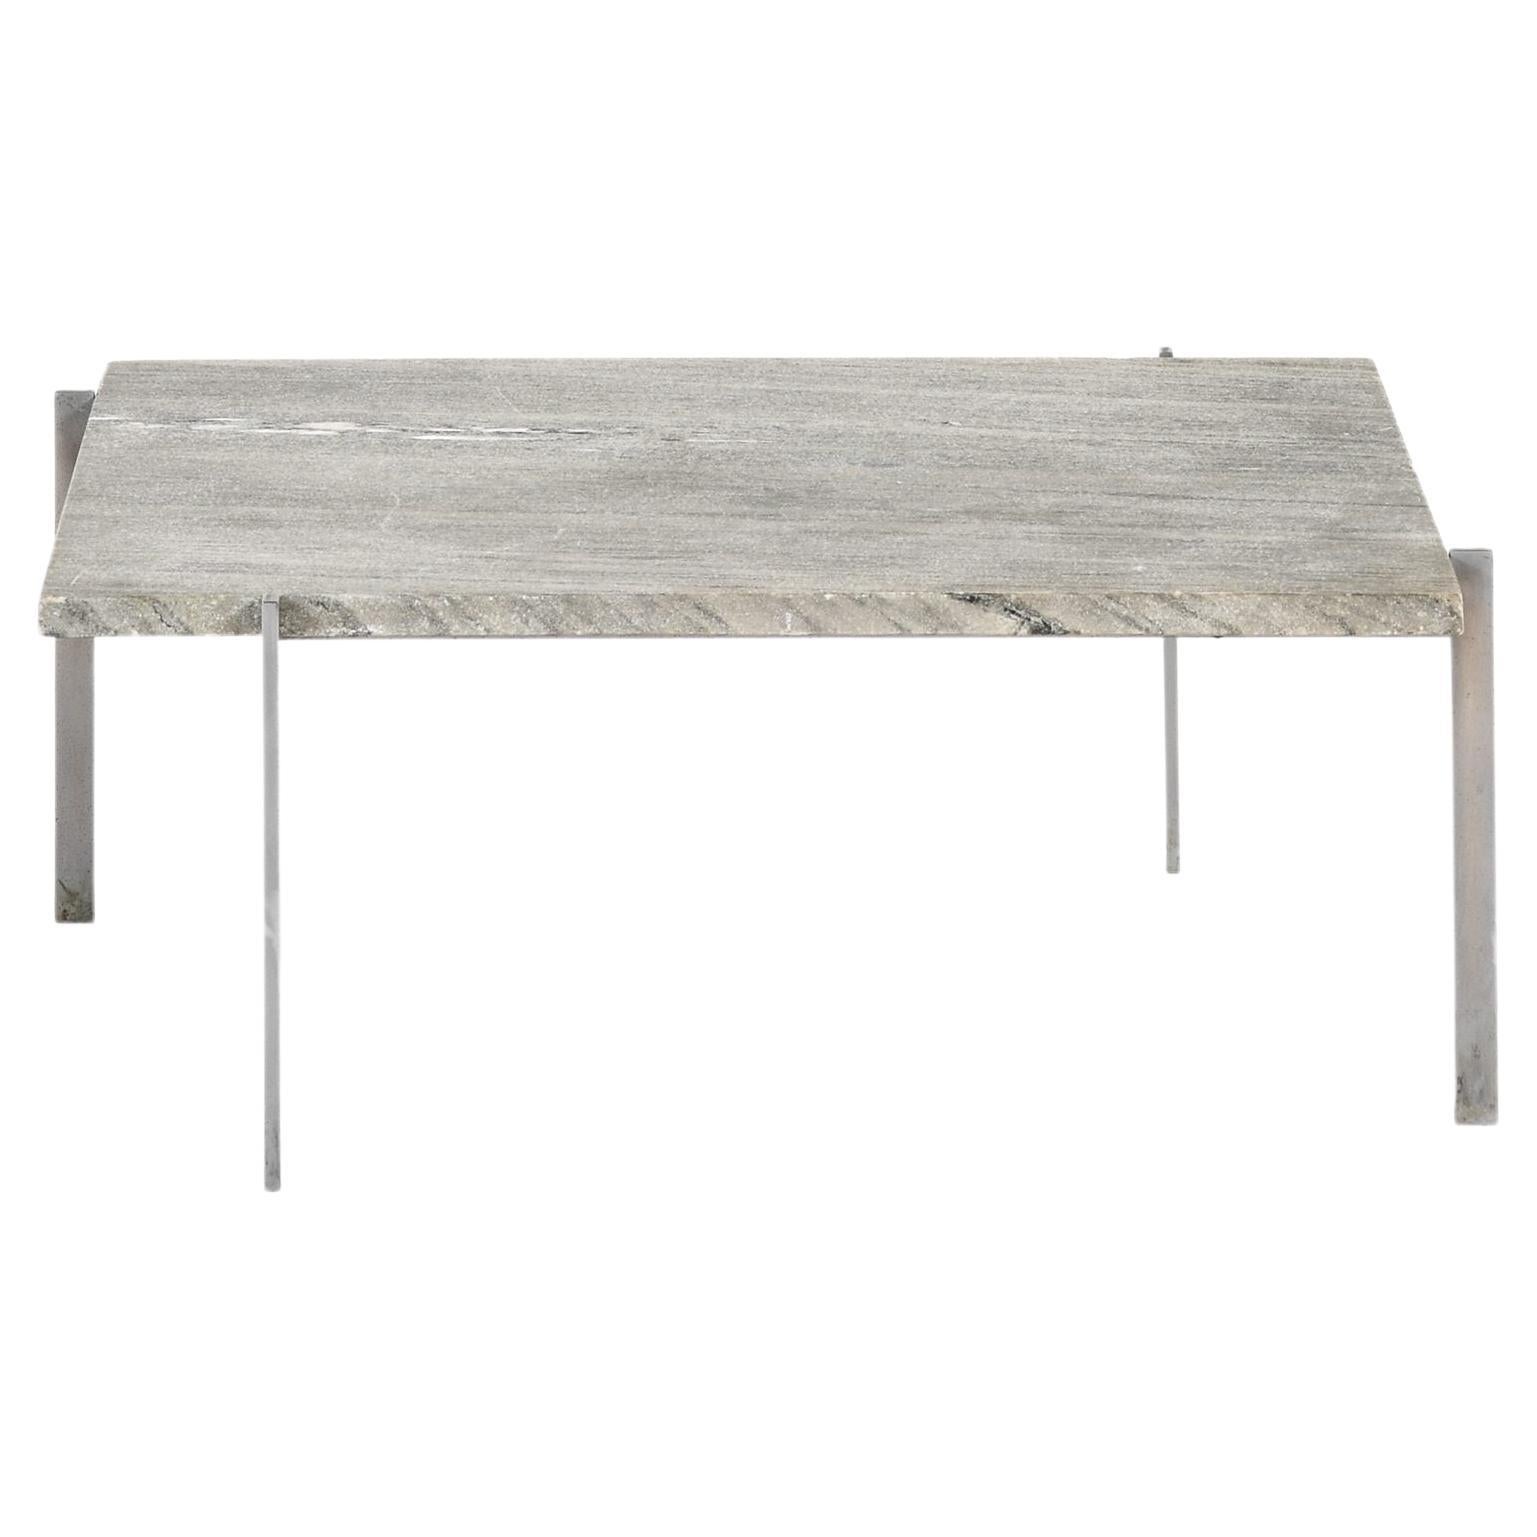 Coffee Table in Steel with Cipollini Marble Top by Poul Kjærholm, 1950s